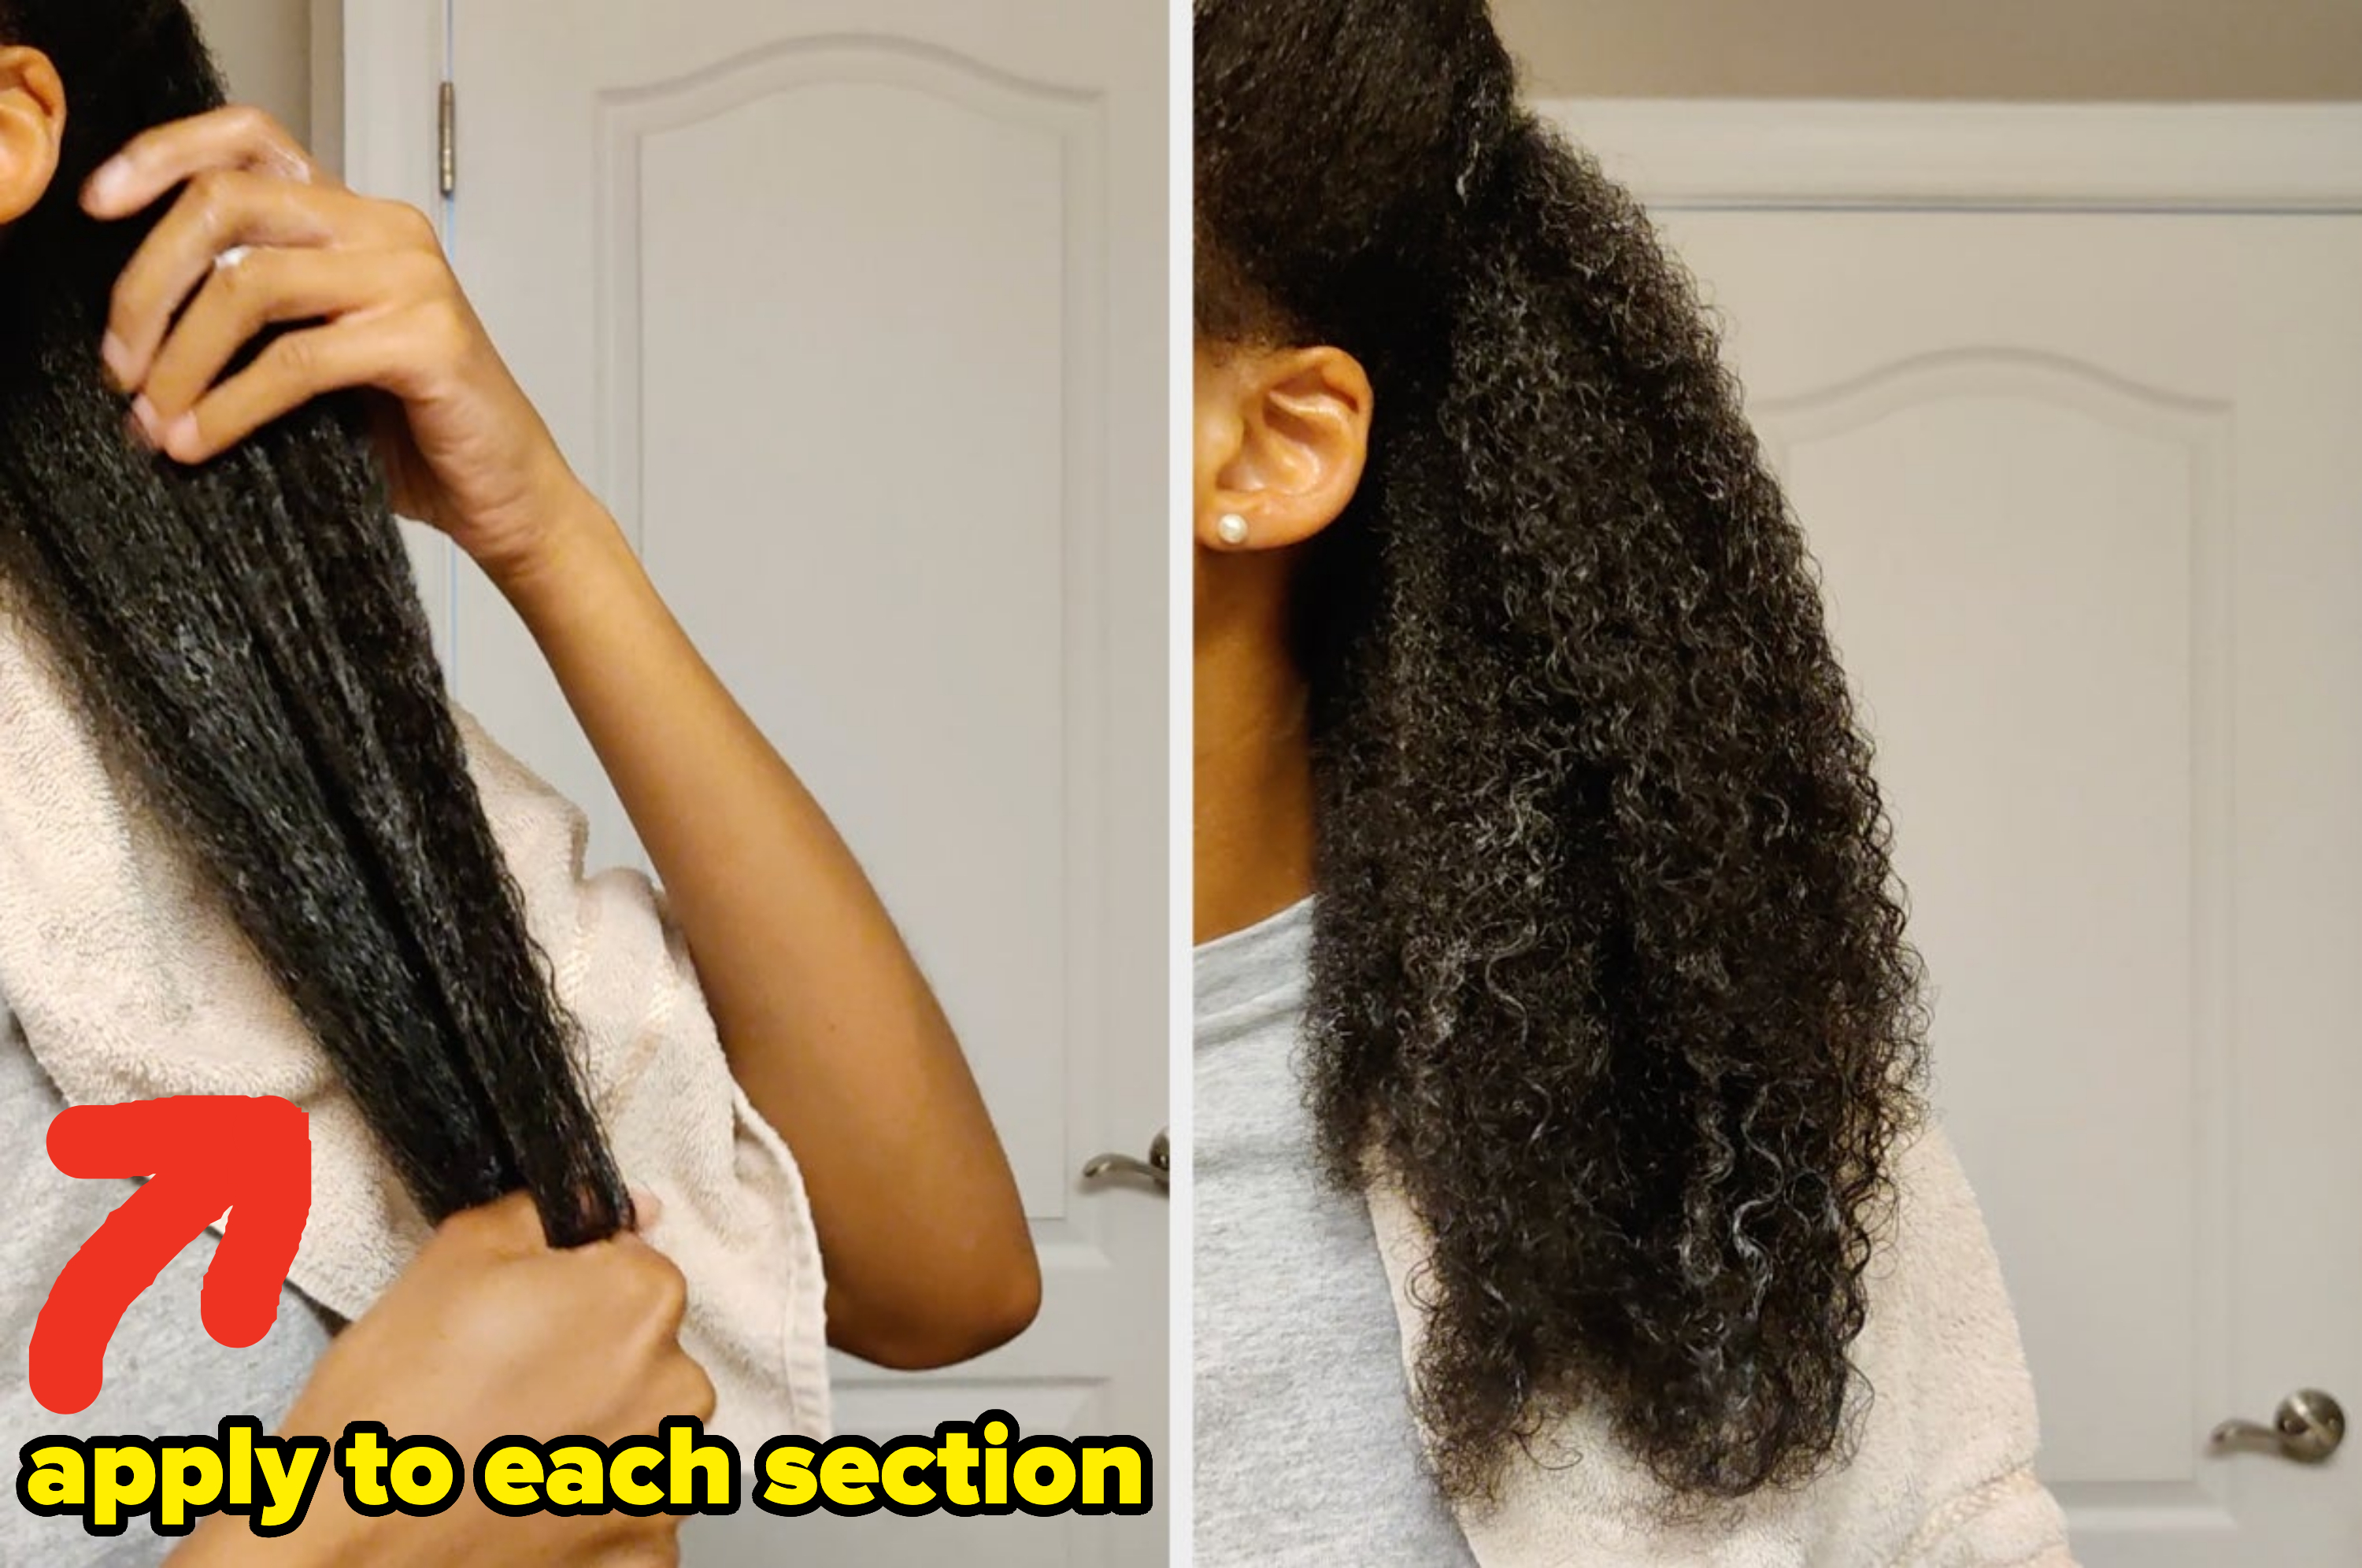 A side-by-side photo: Applying the product on hair on left; then, the result, with natural curls more defined on the right